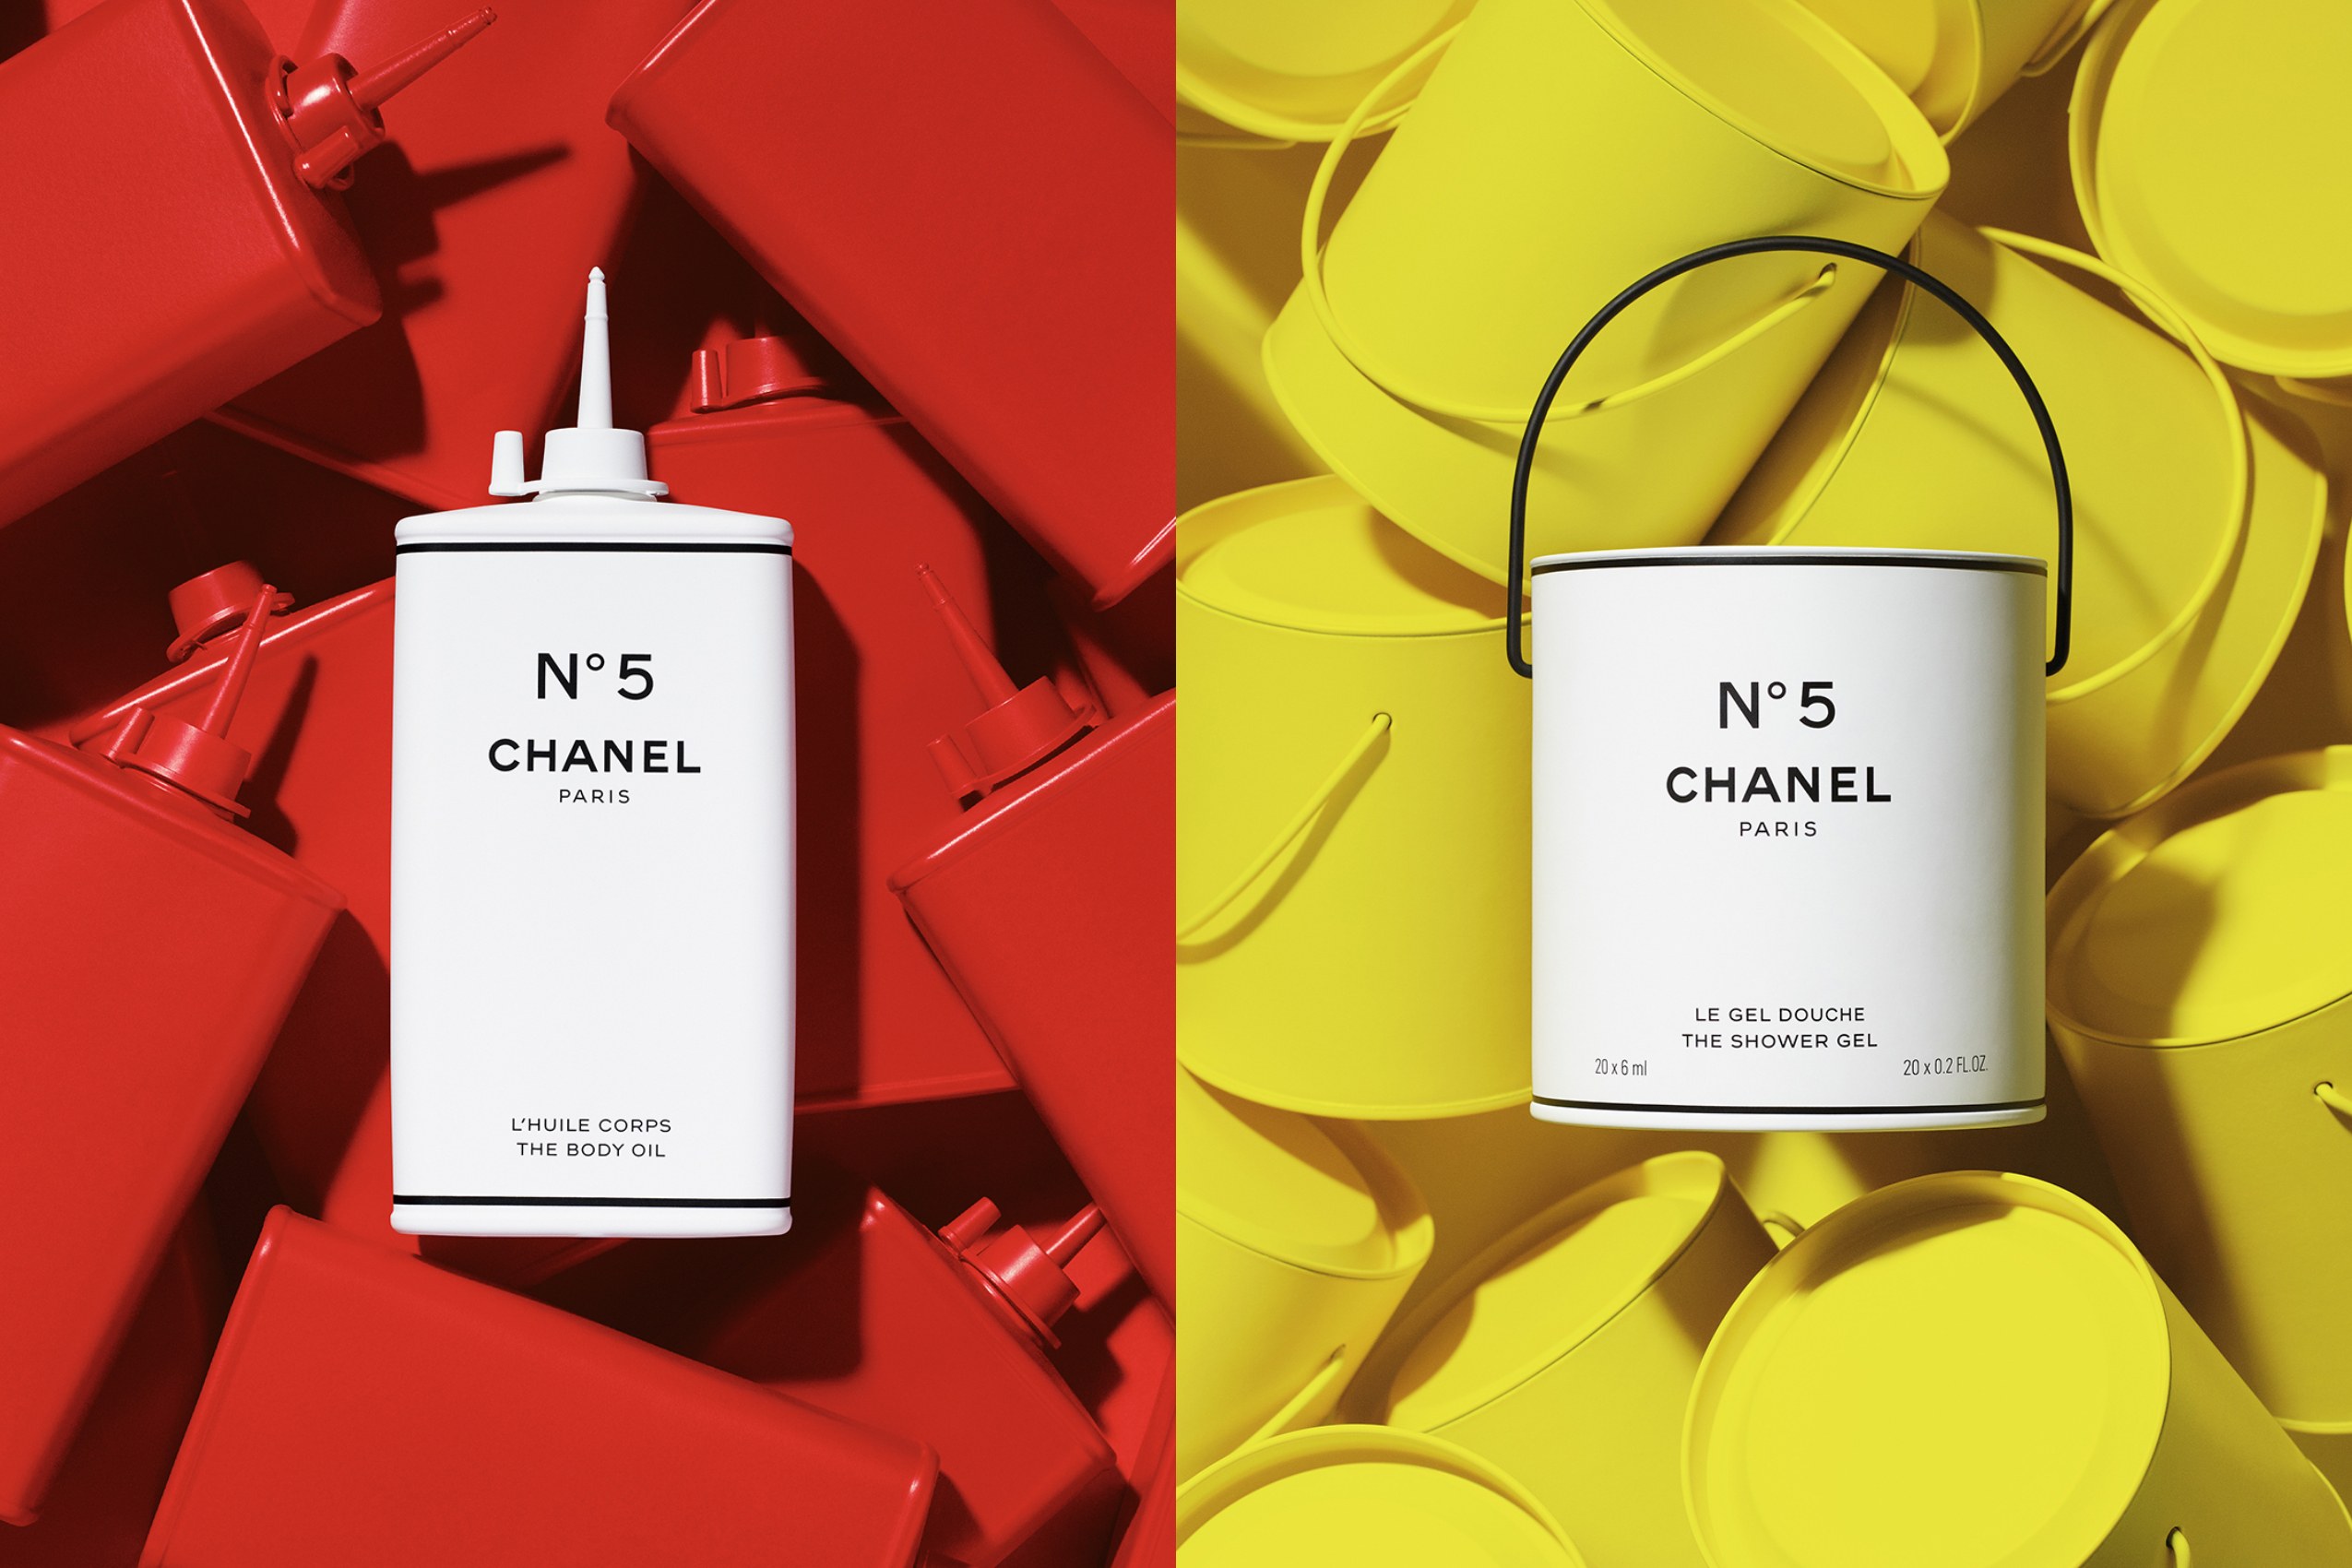 CHANEL Factory 5 Oil Can